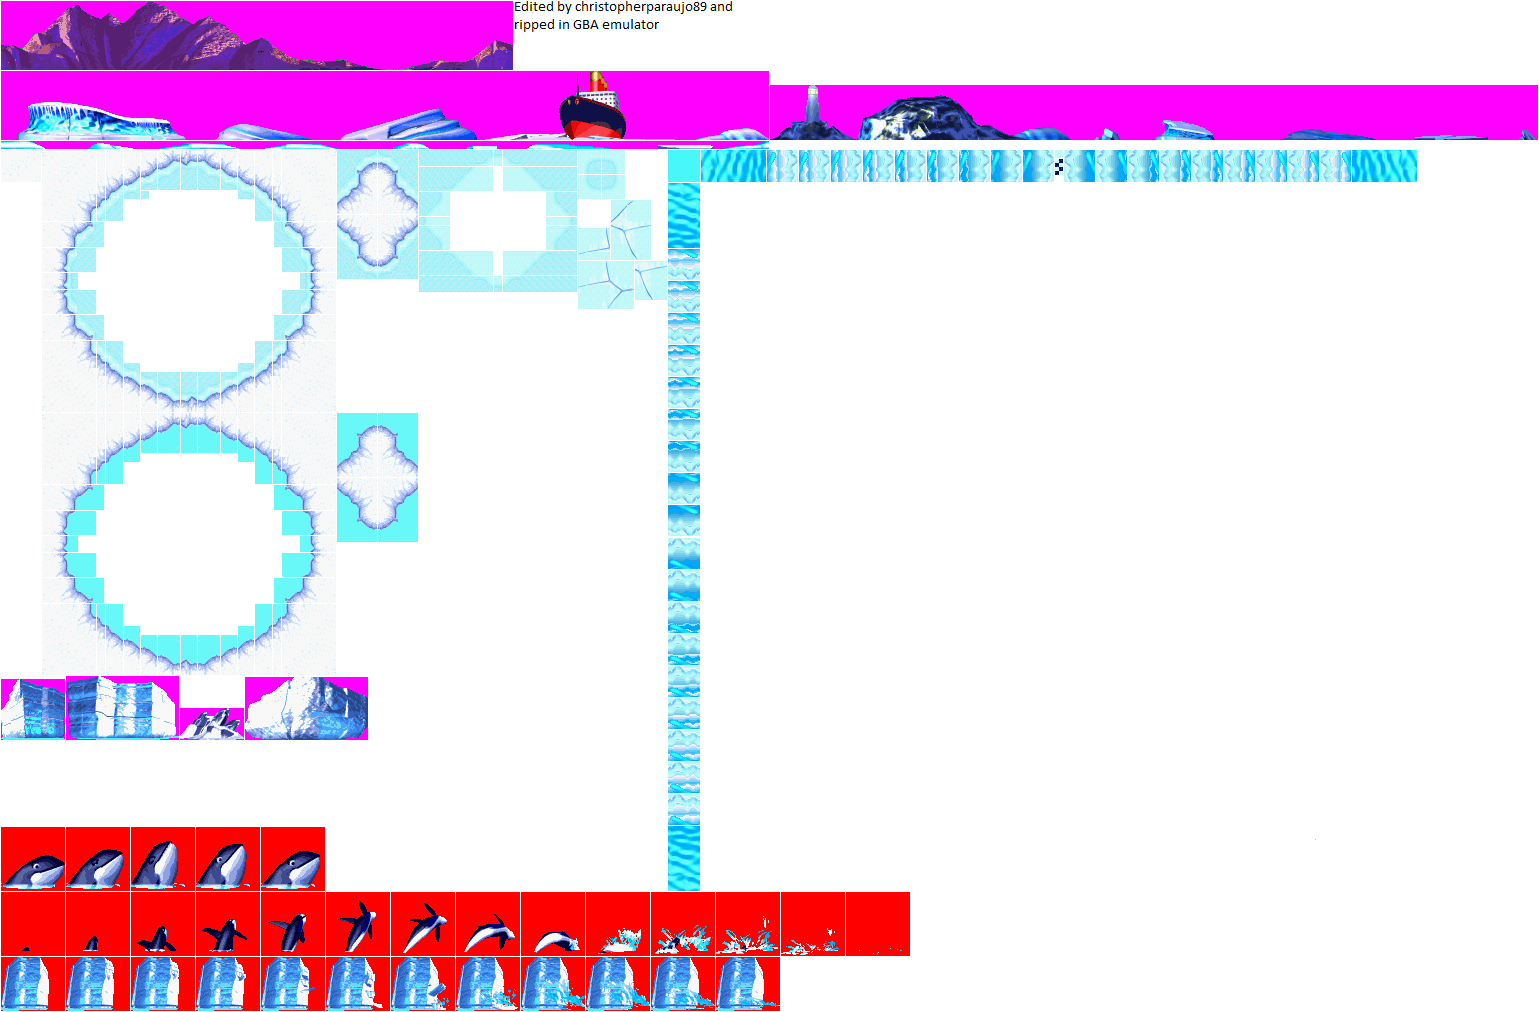 Diddy Kong Pilot (Prototype) - Ice (2003)